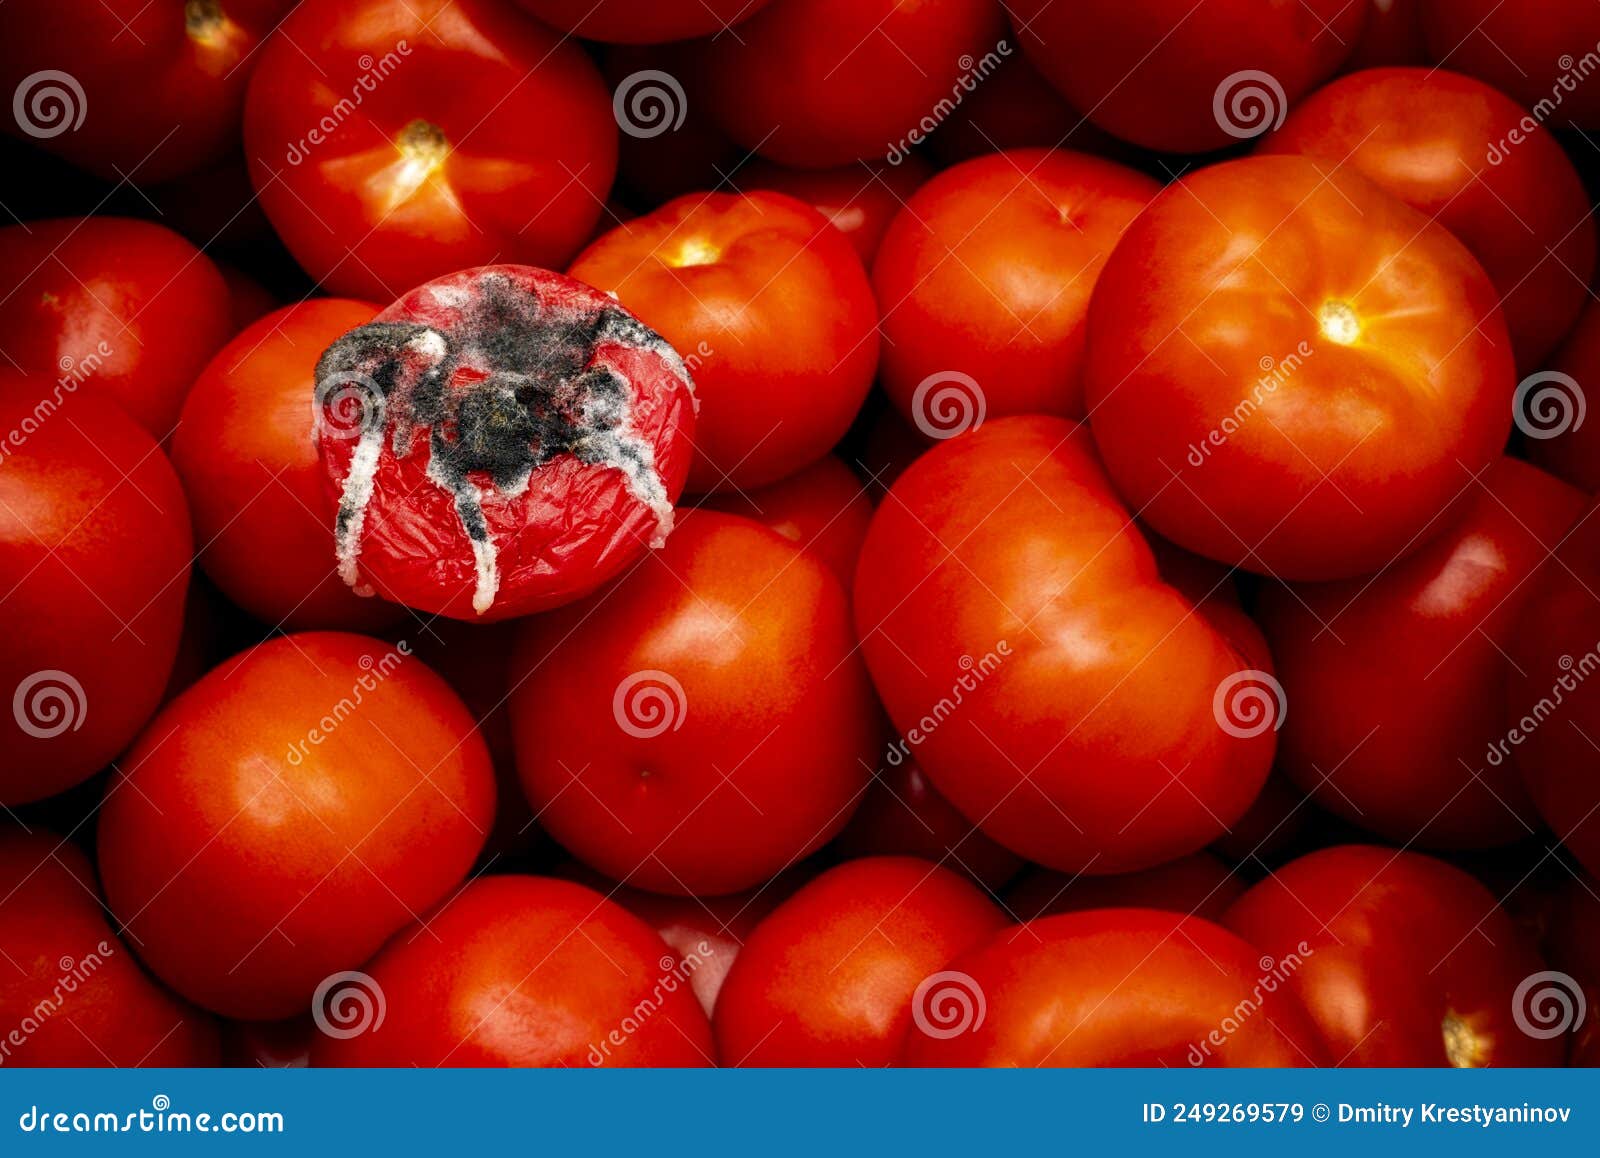 Tomatoes in store stock image. Image of market, good -